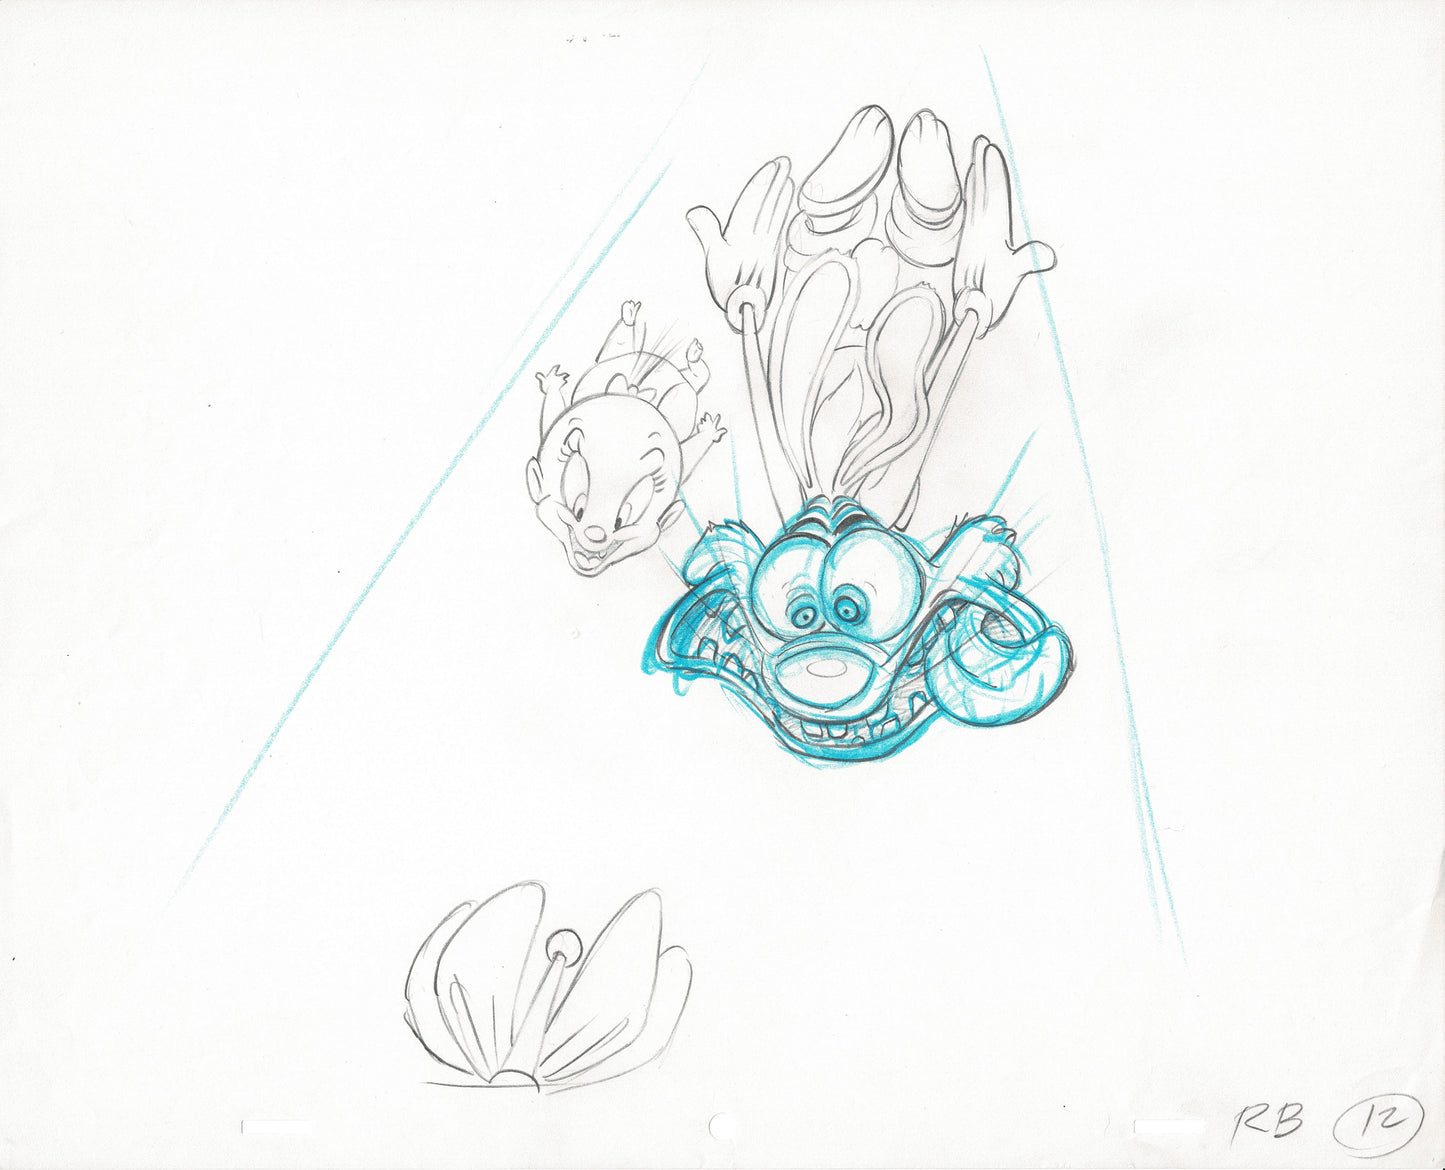 Roger Rabbit Tummy Trouble Herman Spielberg 1989 Production Animation Drawing